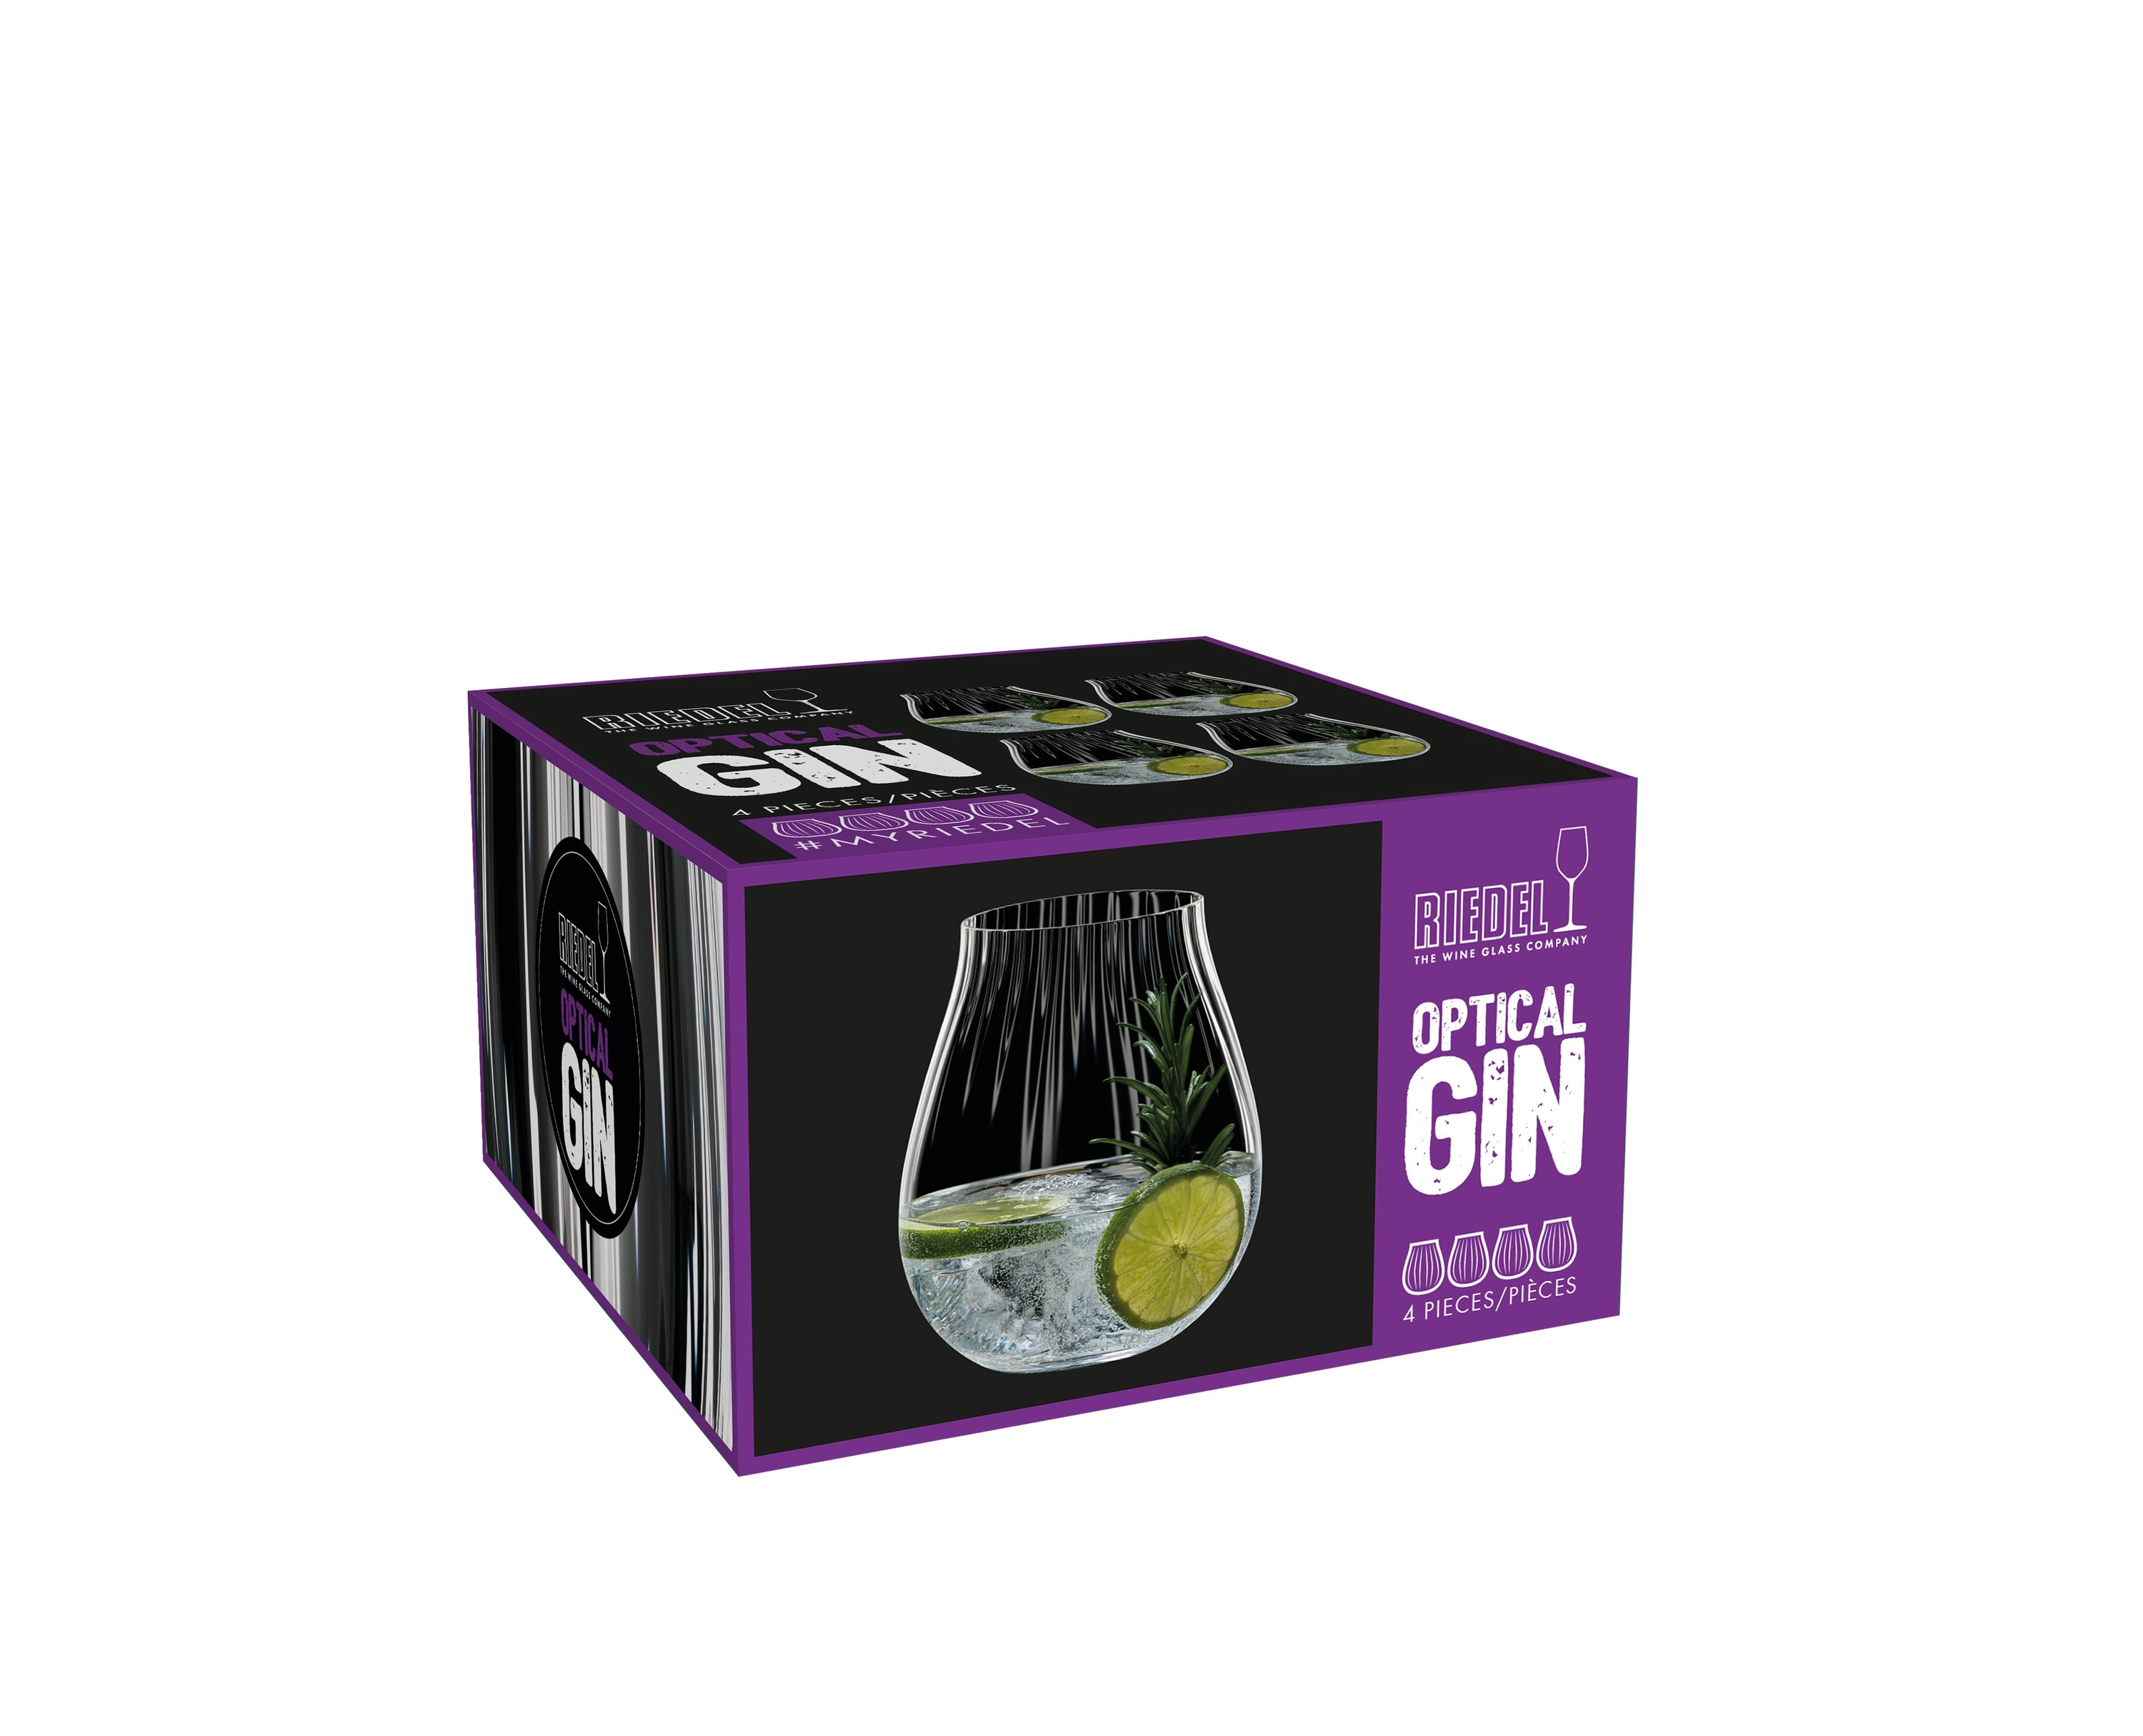 Riedel Gin set optical, Set of 4 pieces